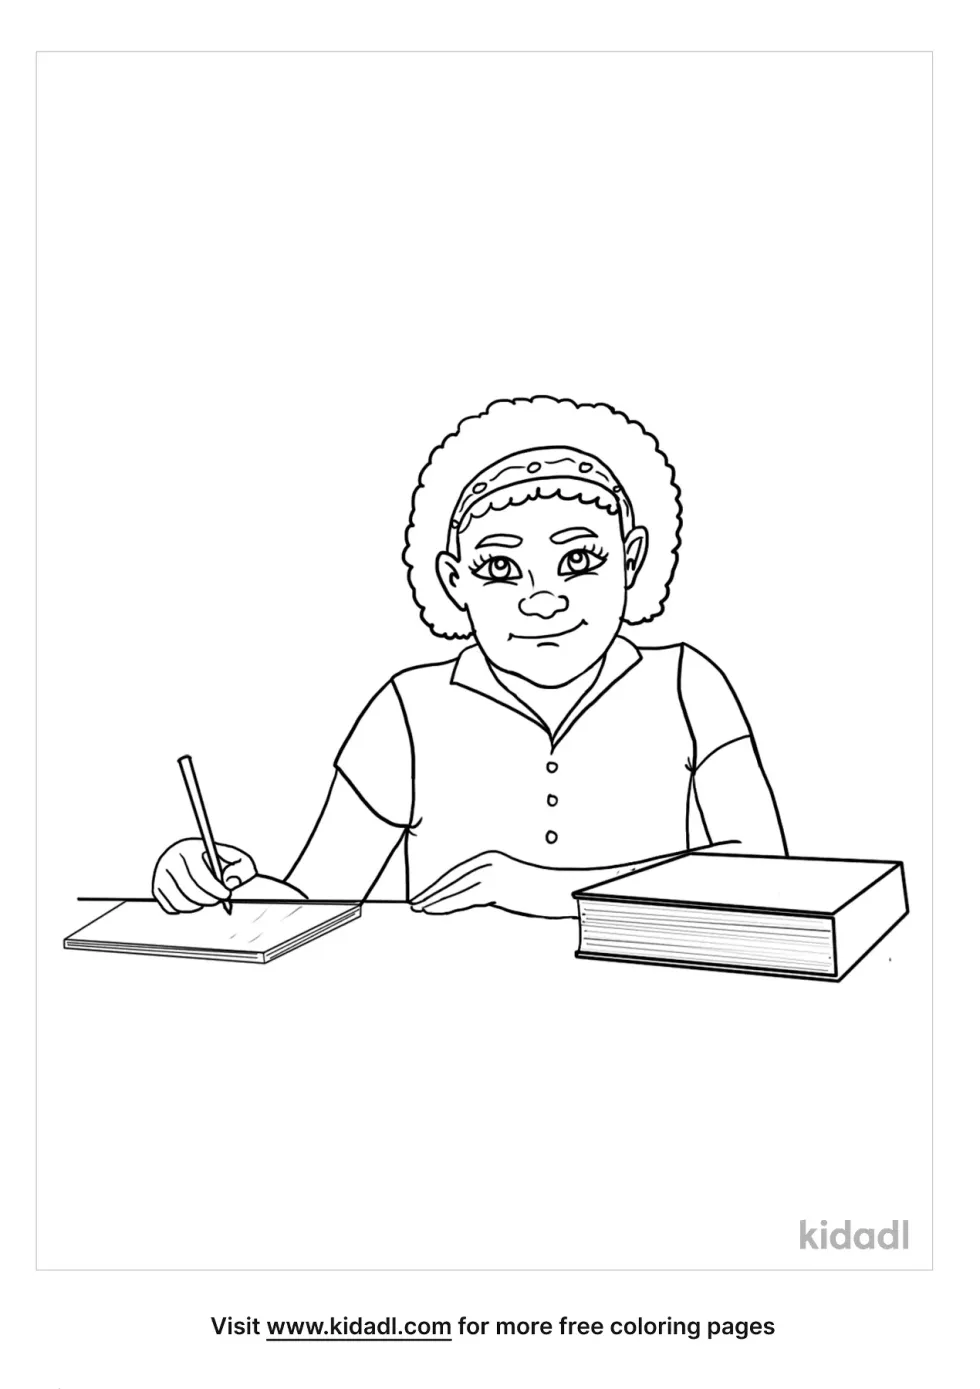 Student Working Coloring Page